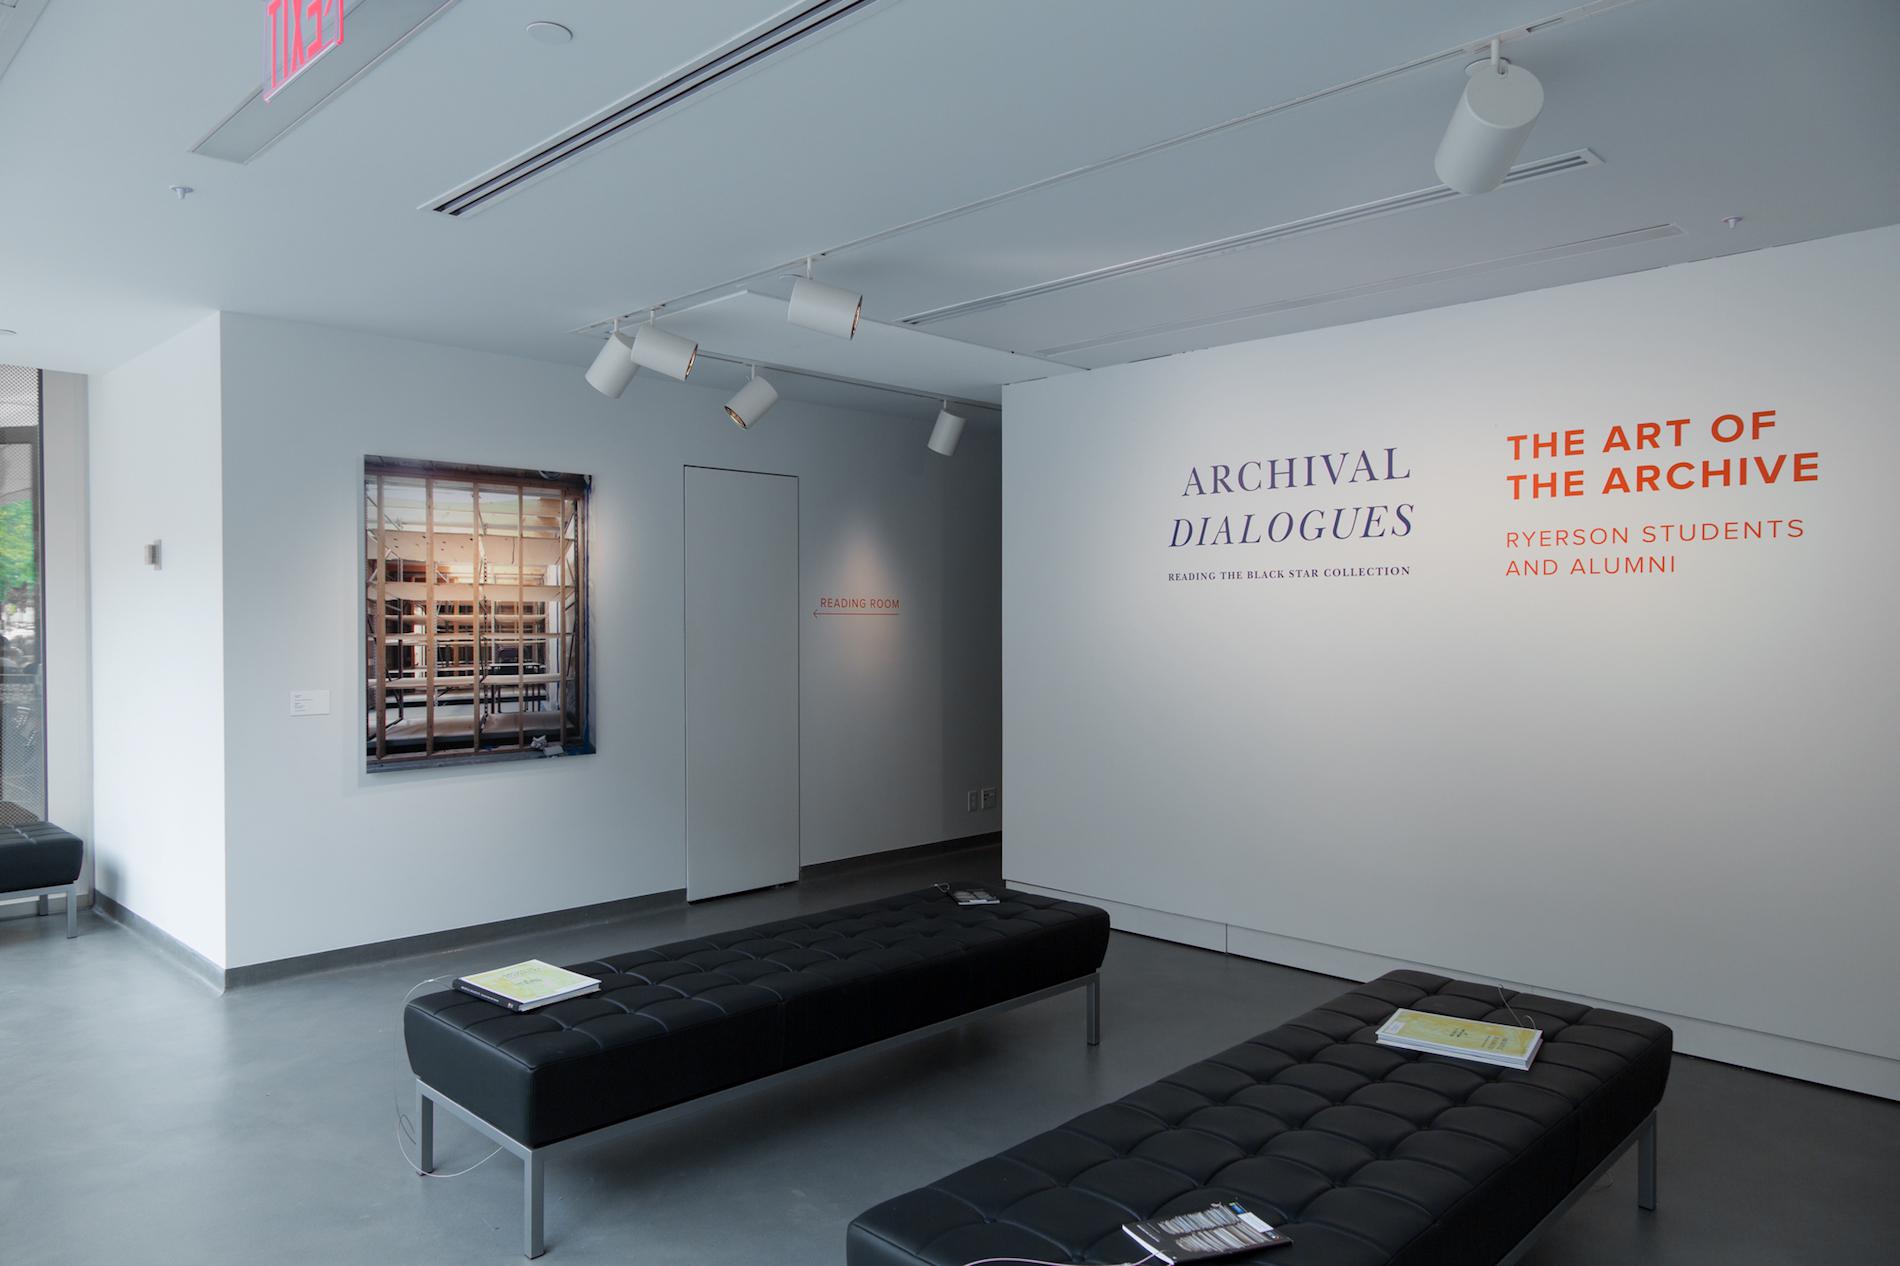 Two black benches sit in the center of the room, text on the wall reads "Archival Dialogues: Reading the Black Star Collection" and "The Art of the Archive: Ryerson Students and Alumni"